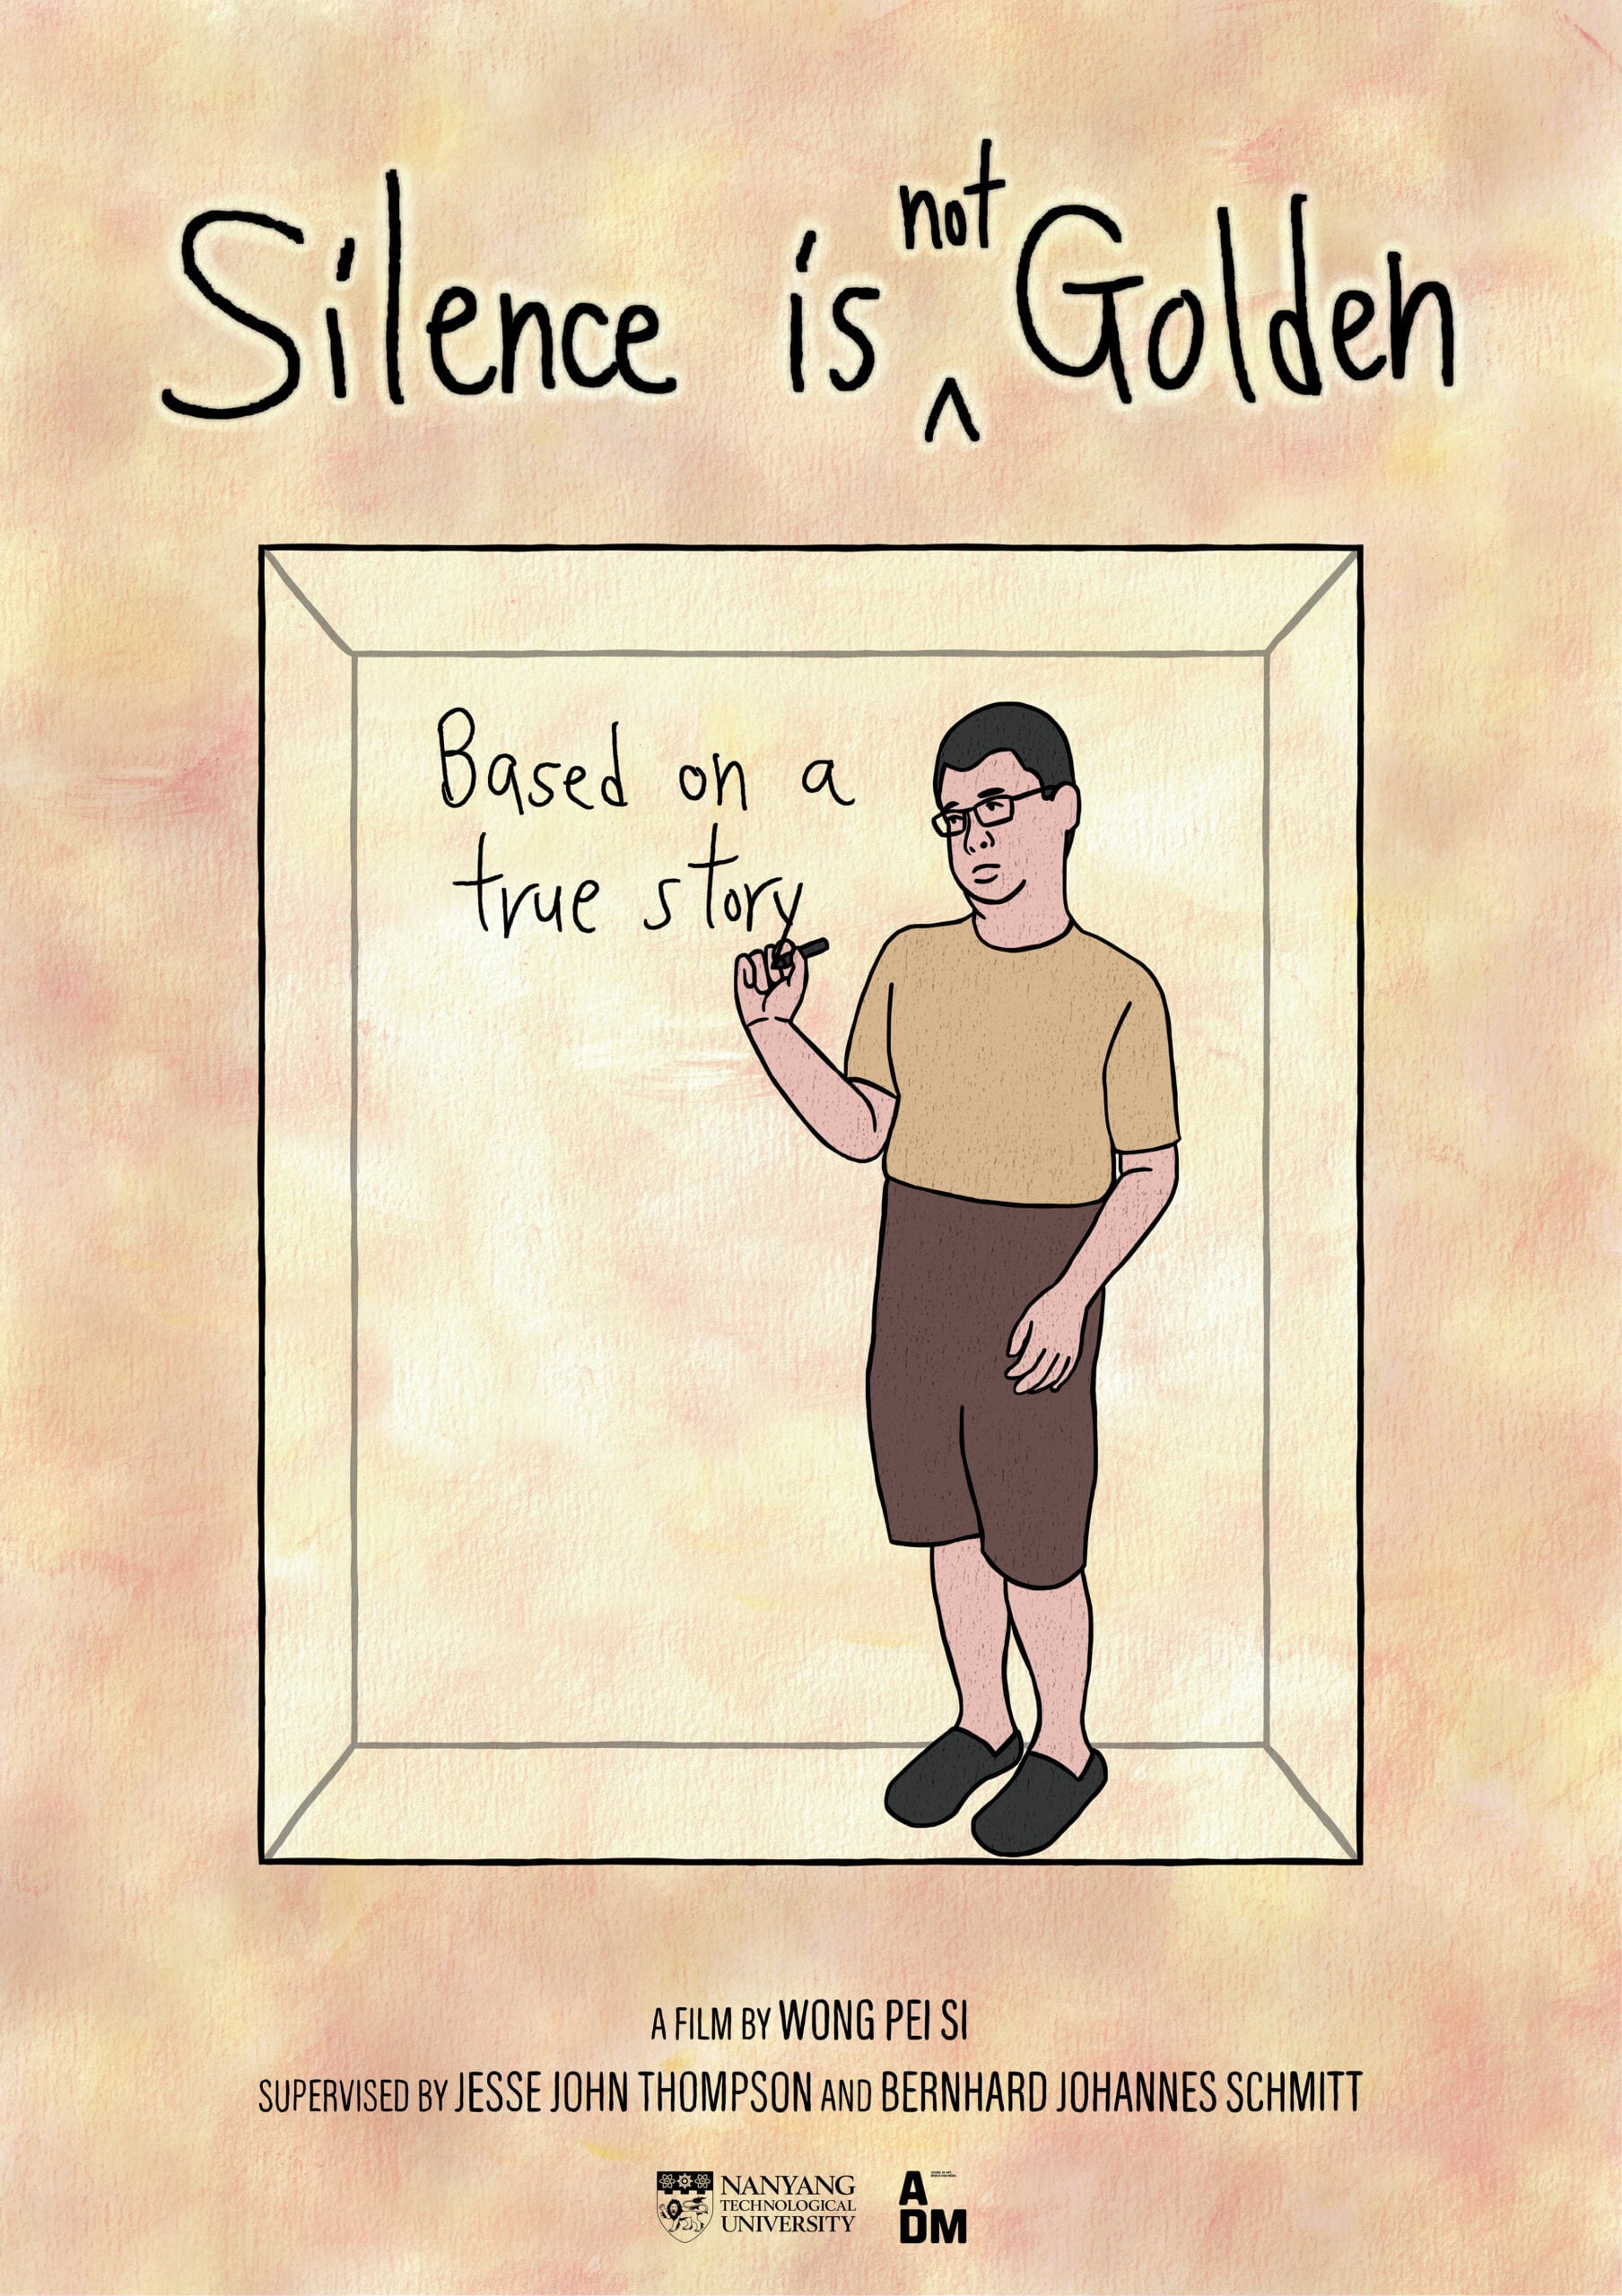 Illustrated poster showing a person with glasses and short dark hair